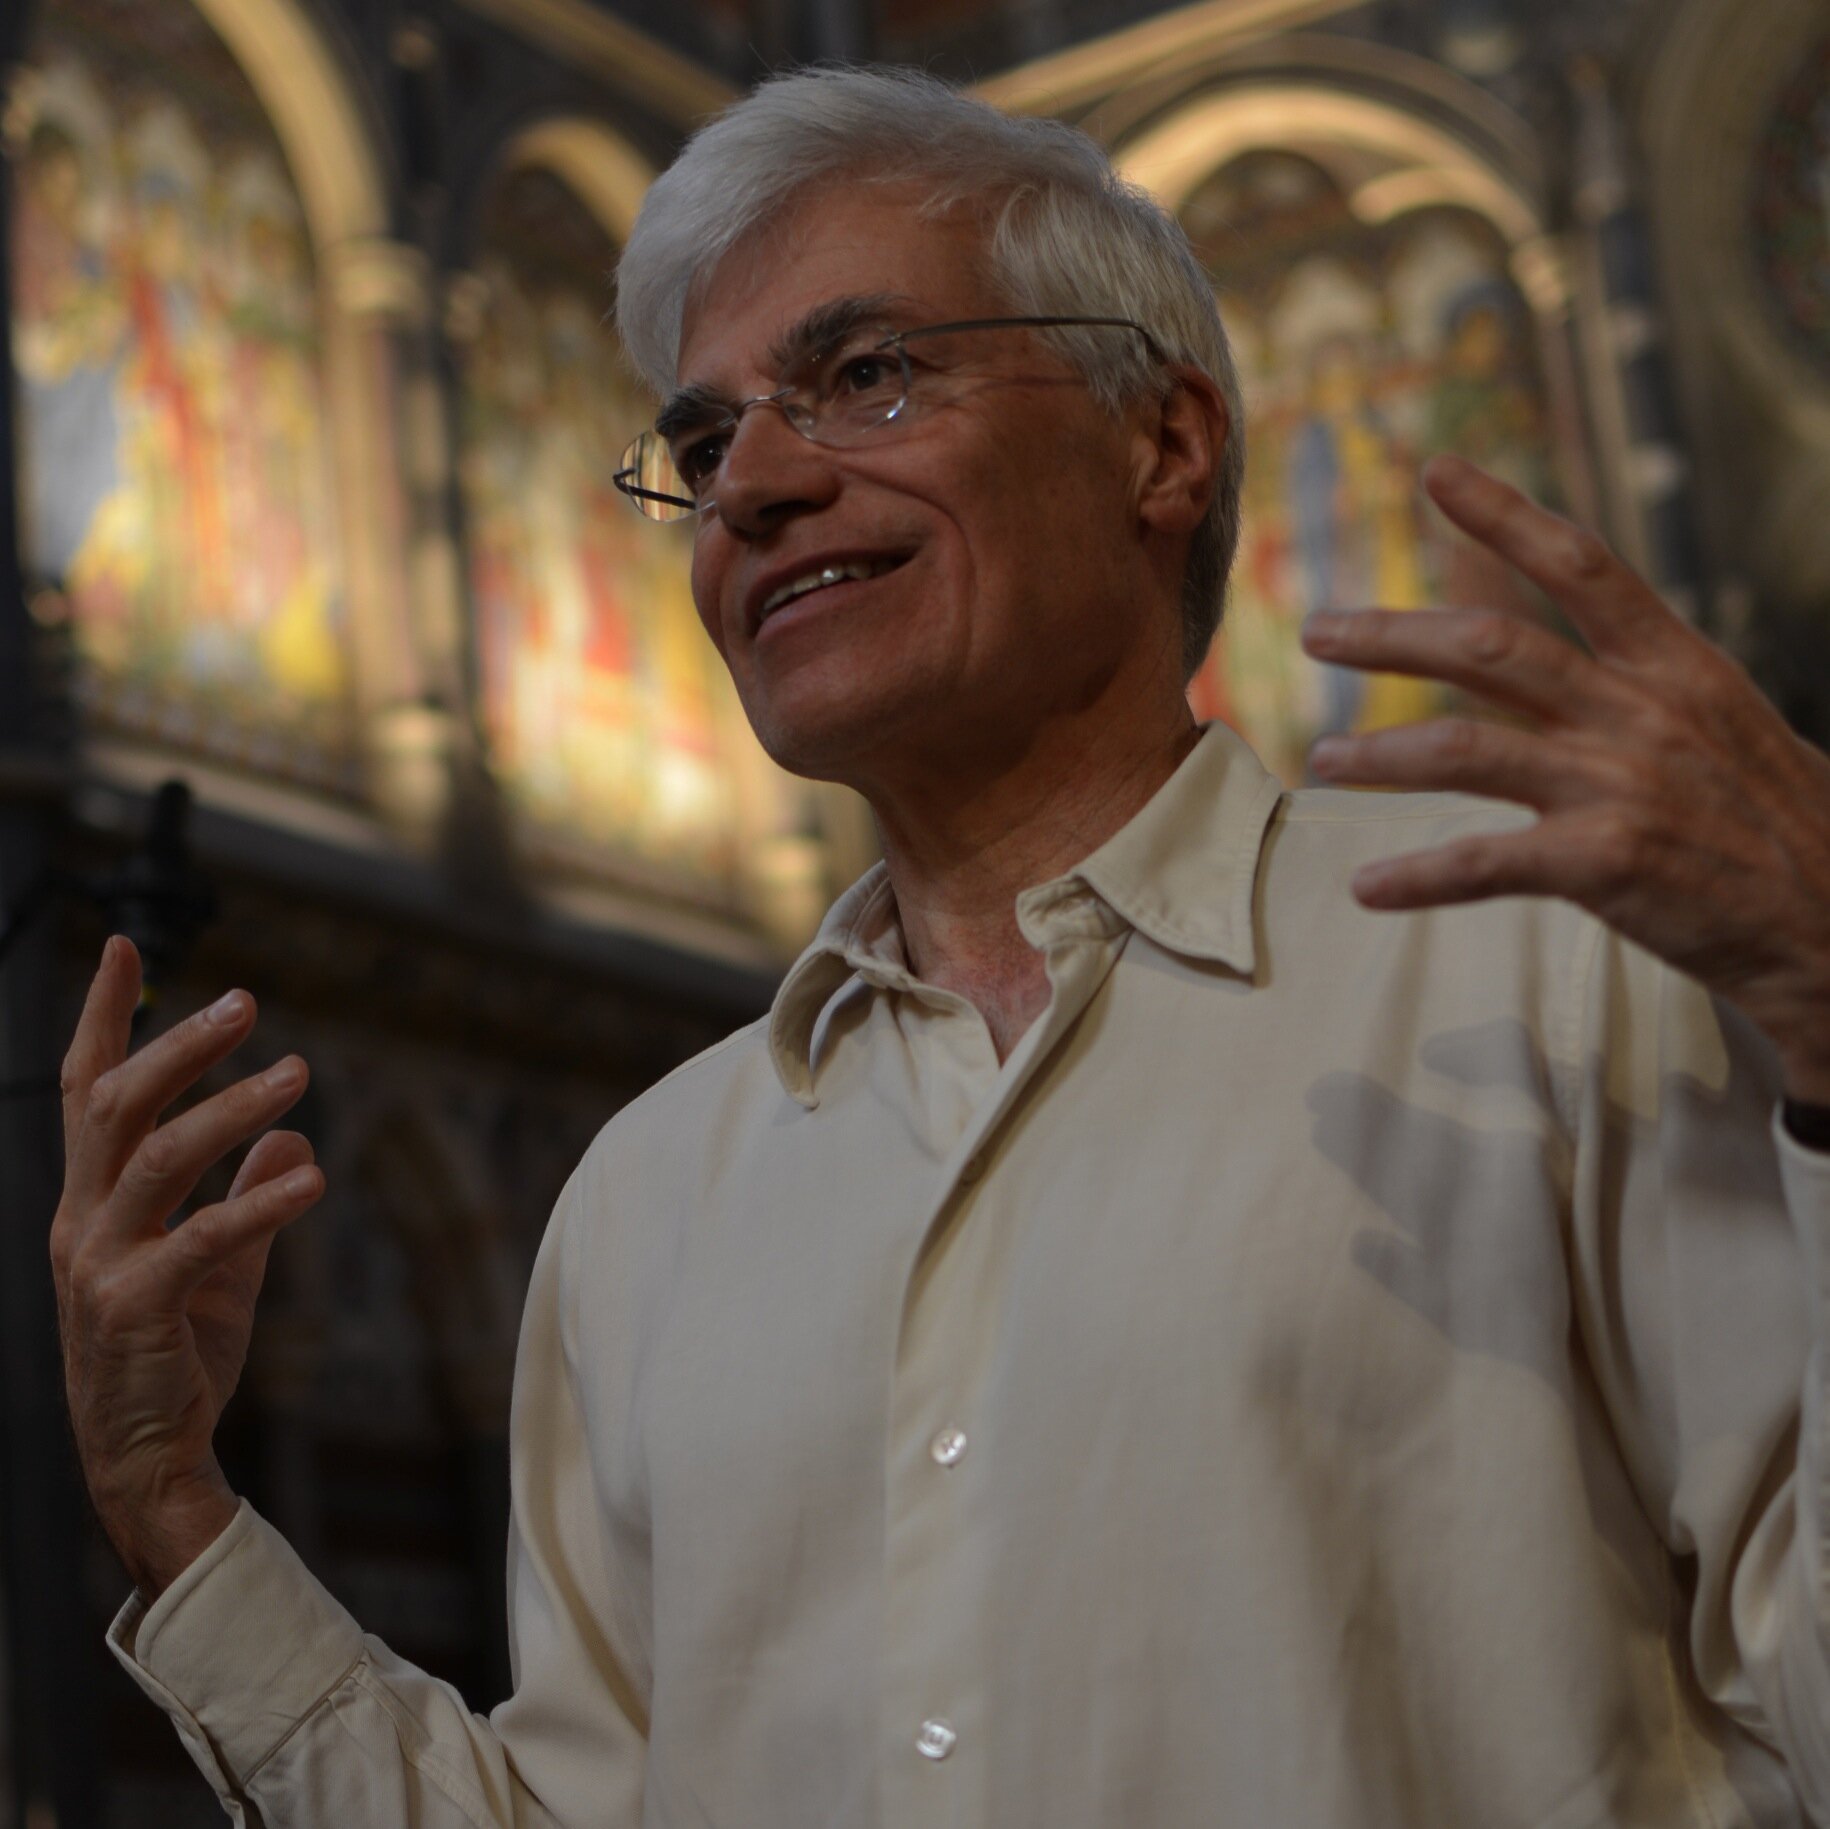 Workshops, masterclasses and guest conducting from the founder of Rodolfus Choral Courses.